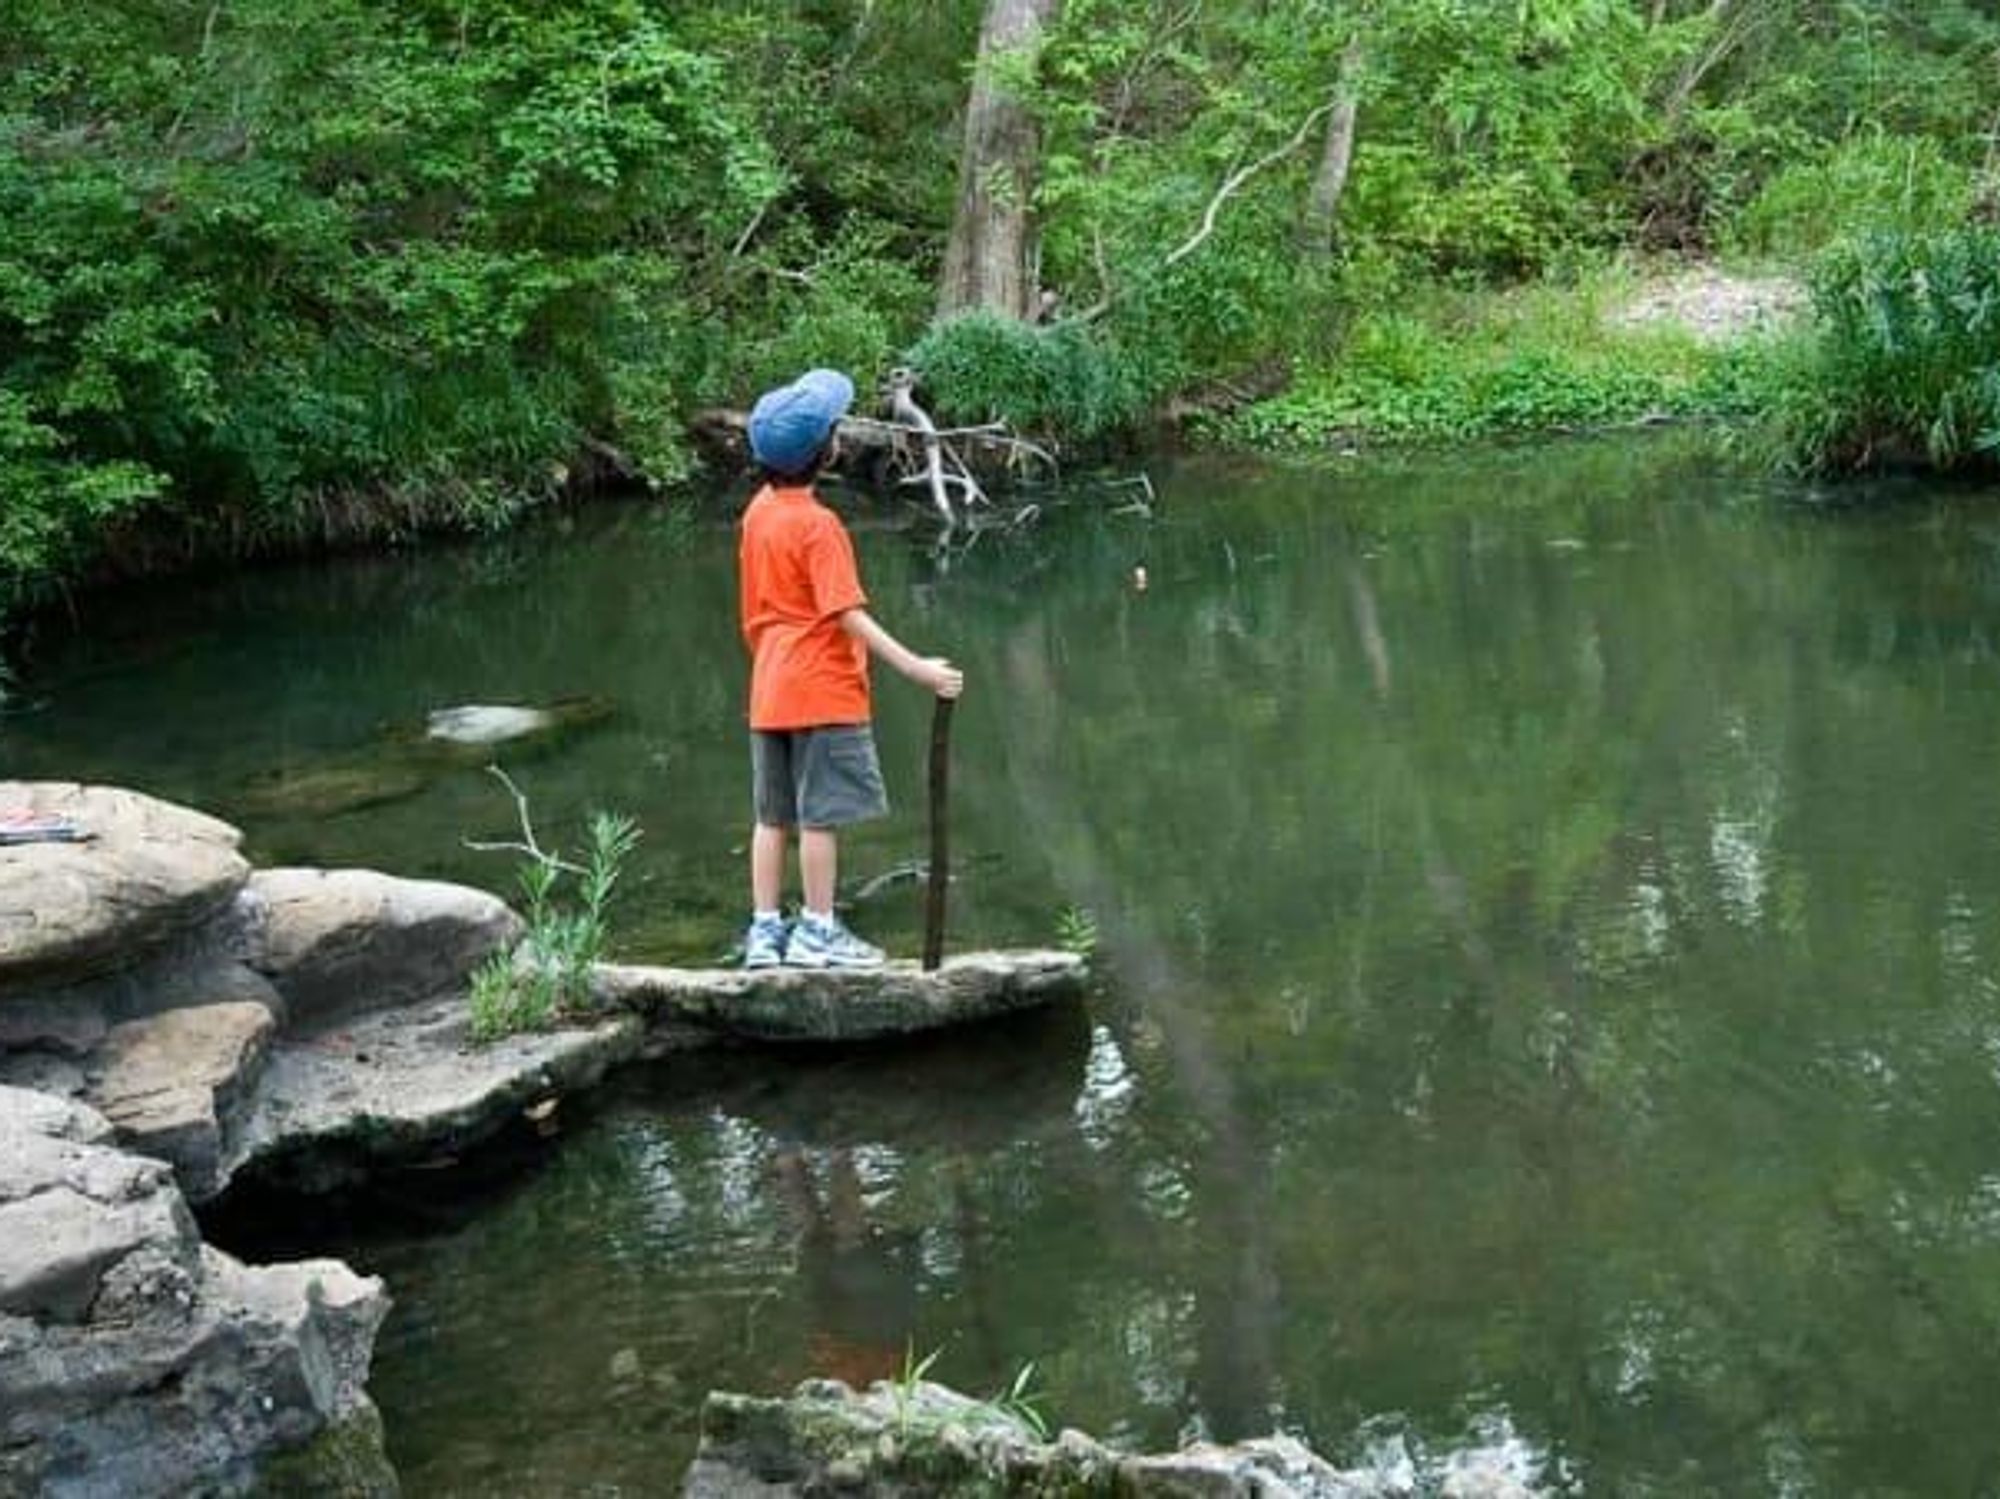 A child stands on a rock formation, holding a walking stick and looking over a river